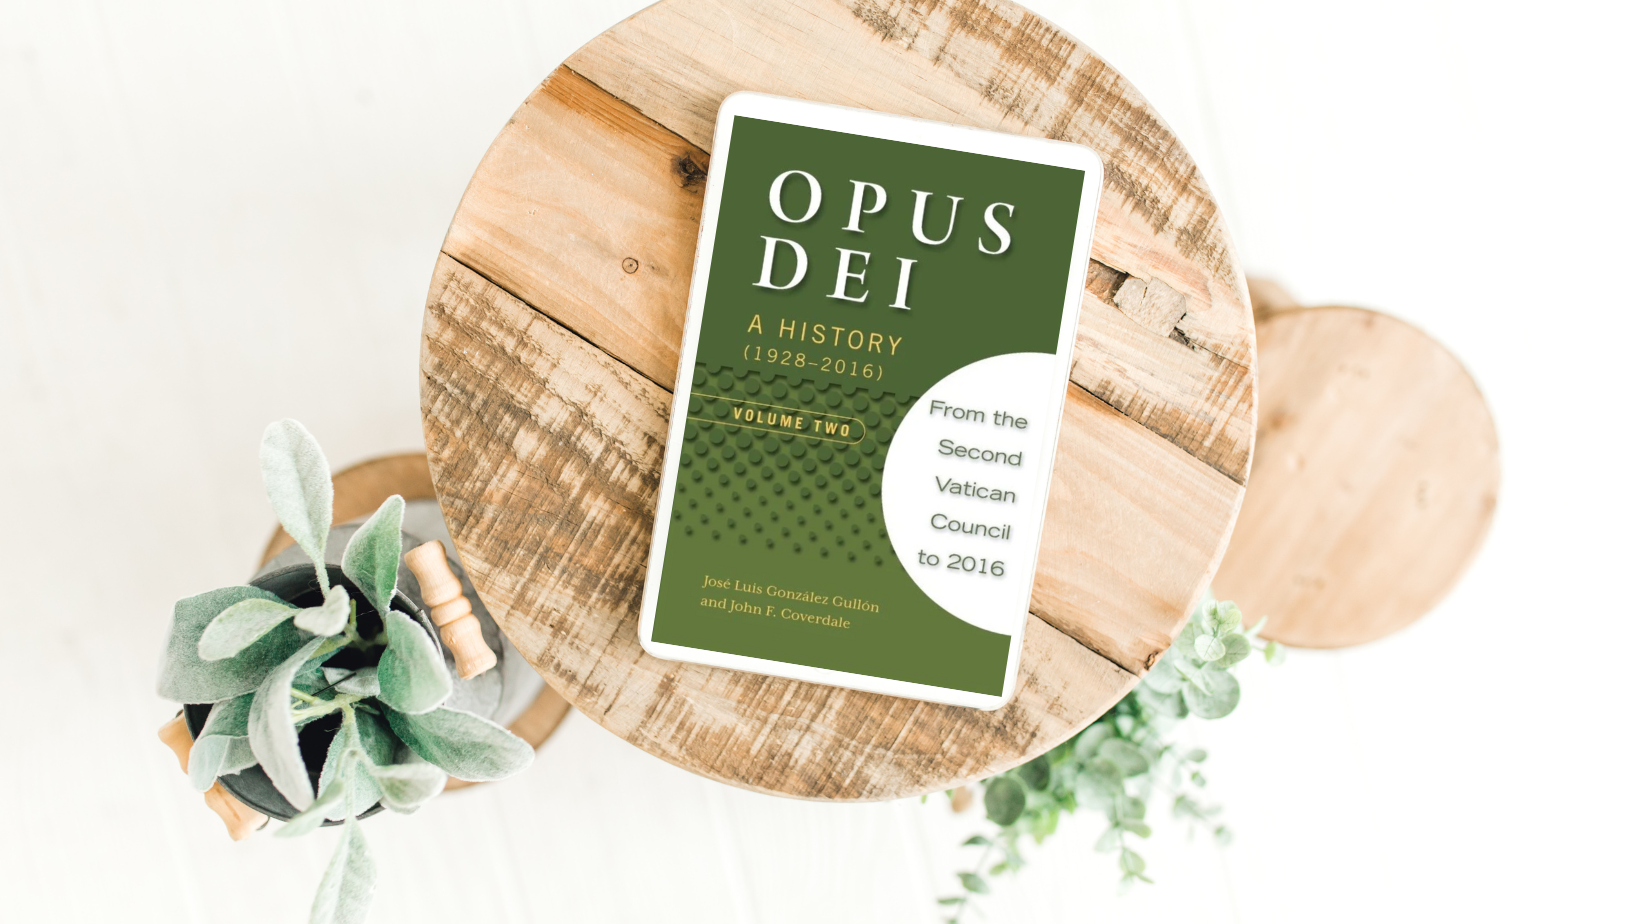 New Release Highlight: Opus Dei: A History, Volume Two